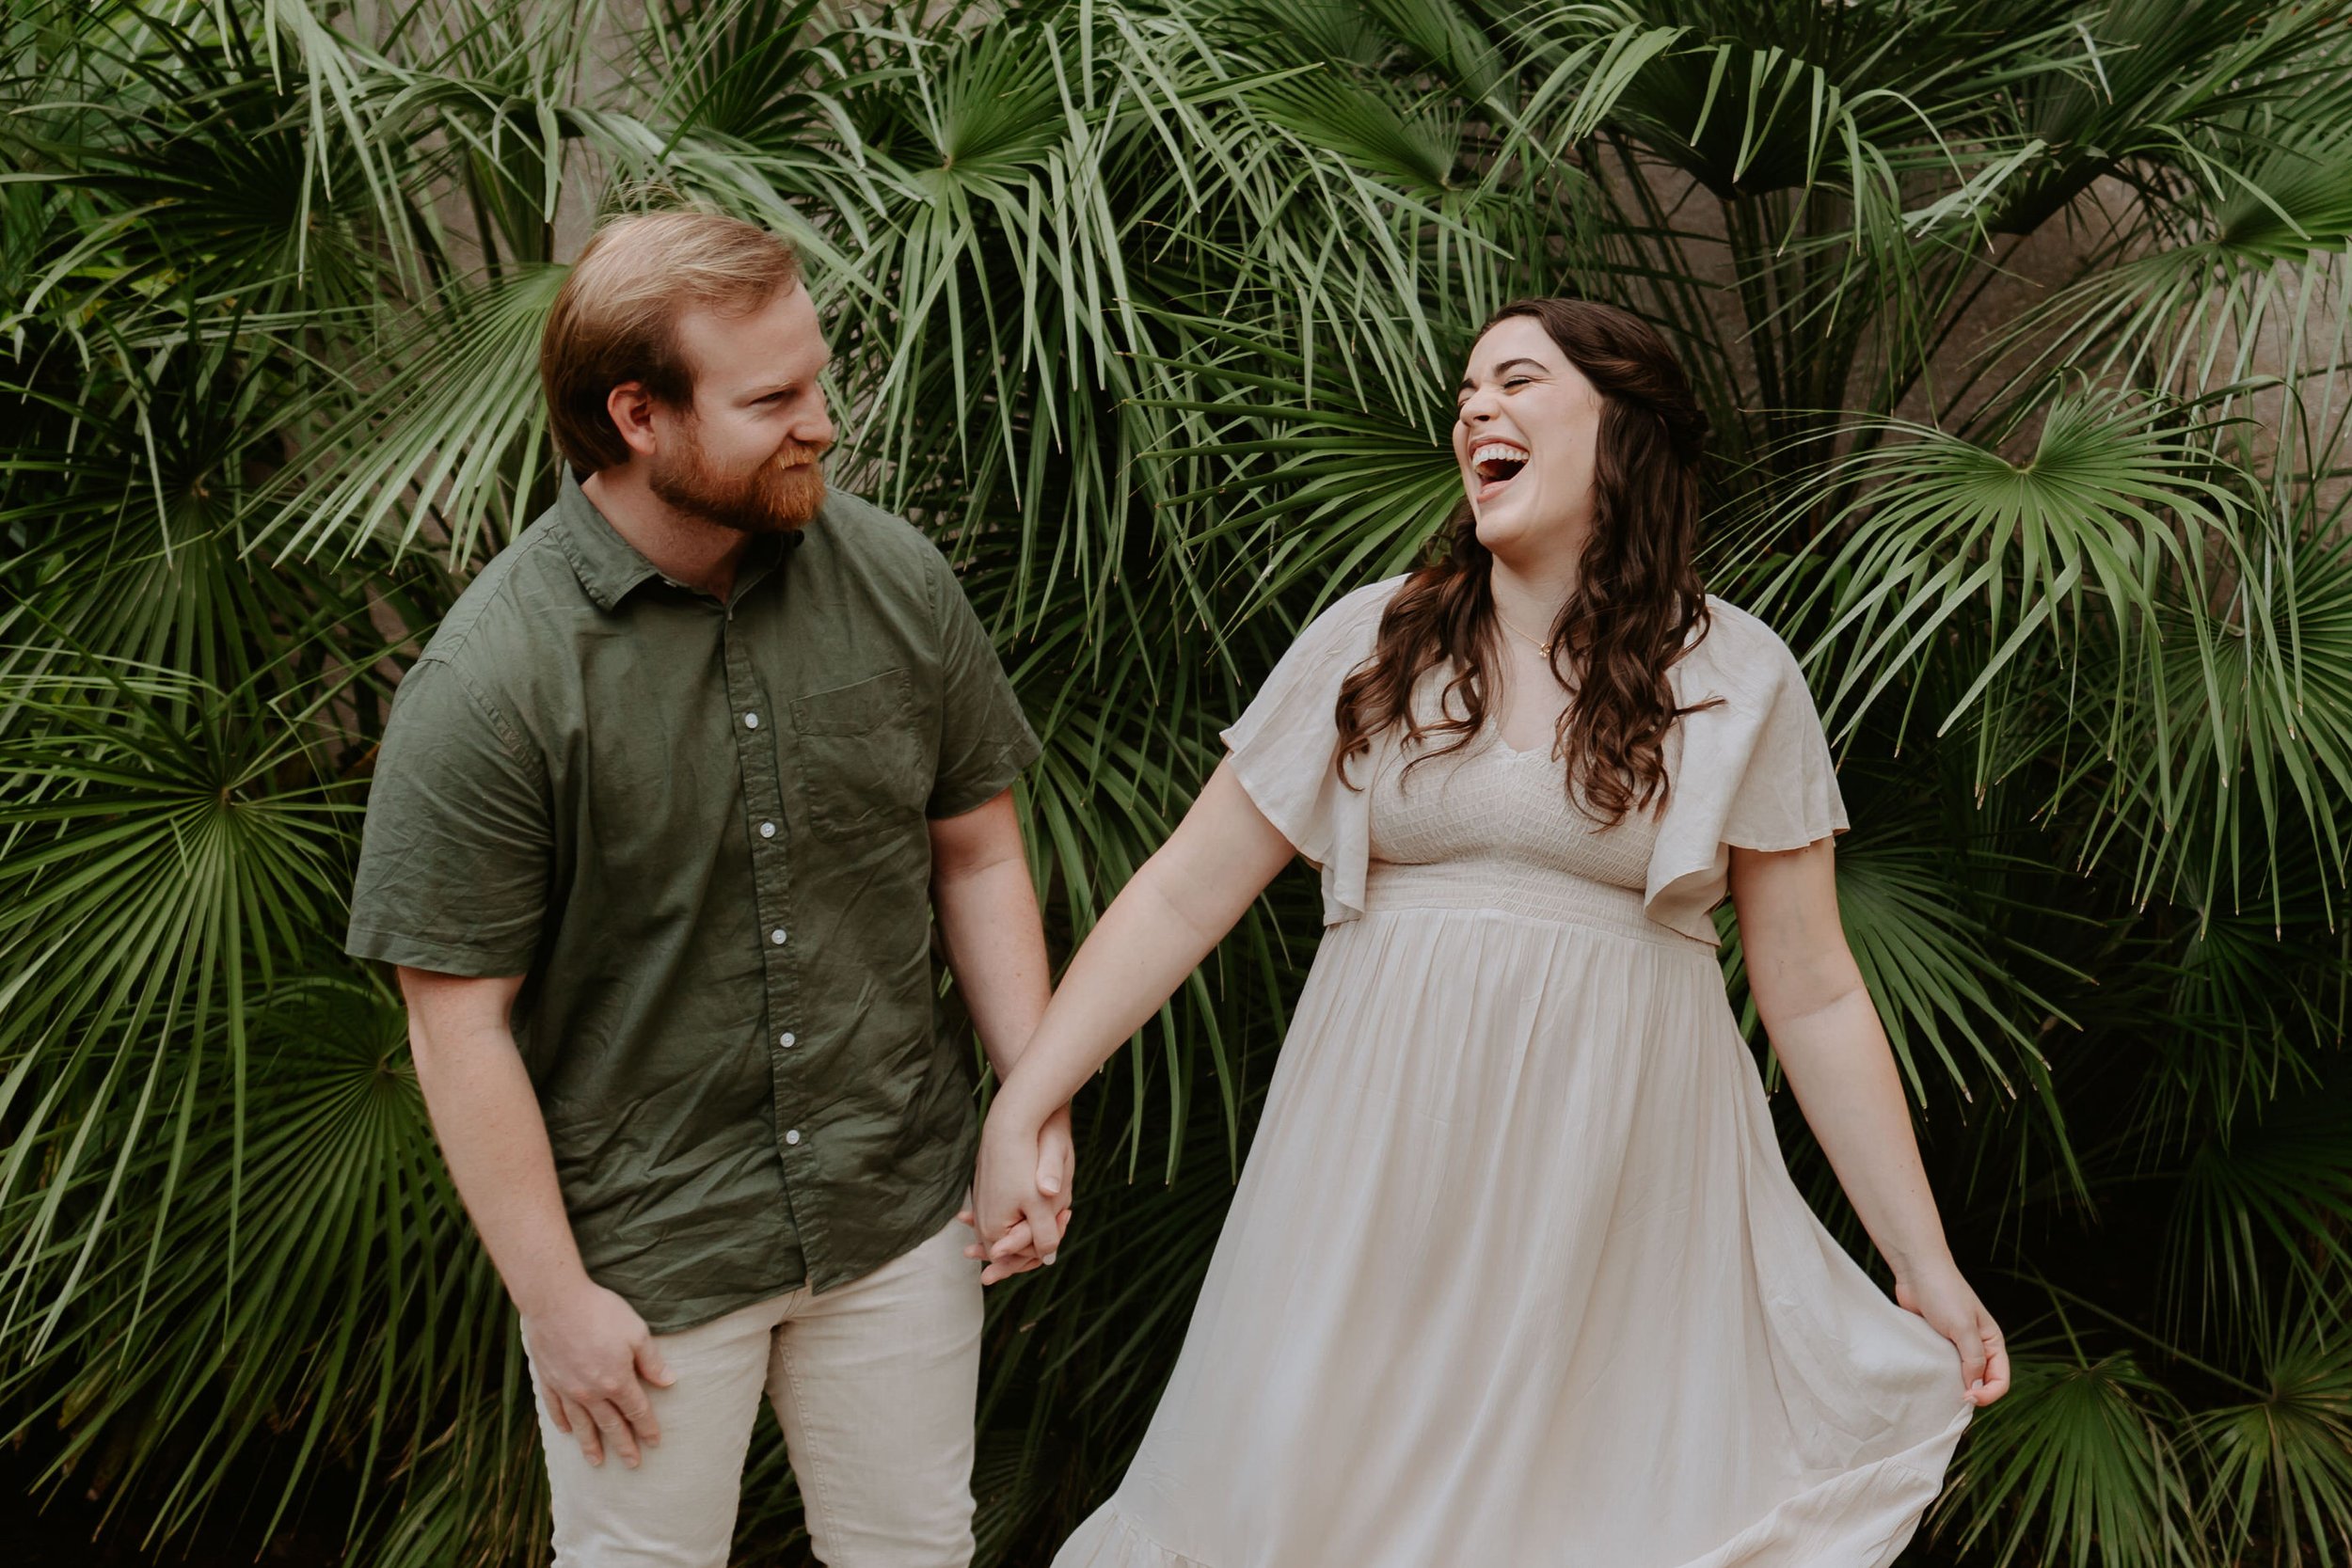 Man and woman hold hands laughing in front of green palm fronds.